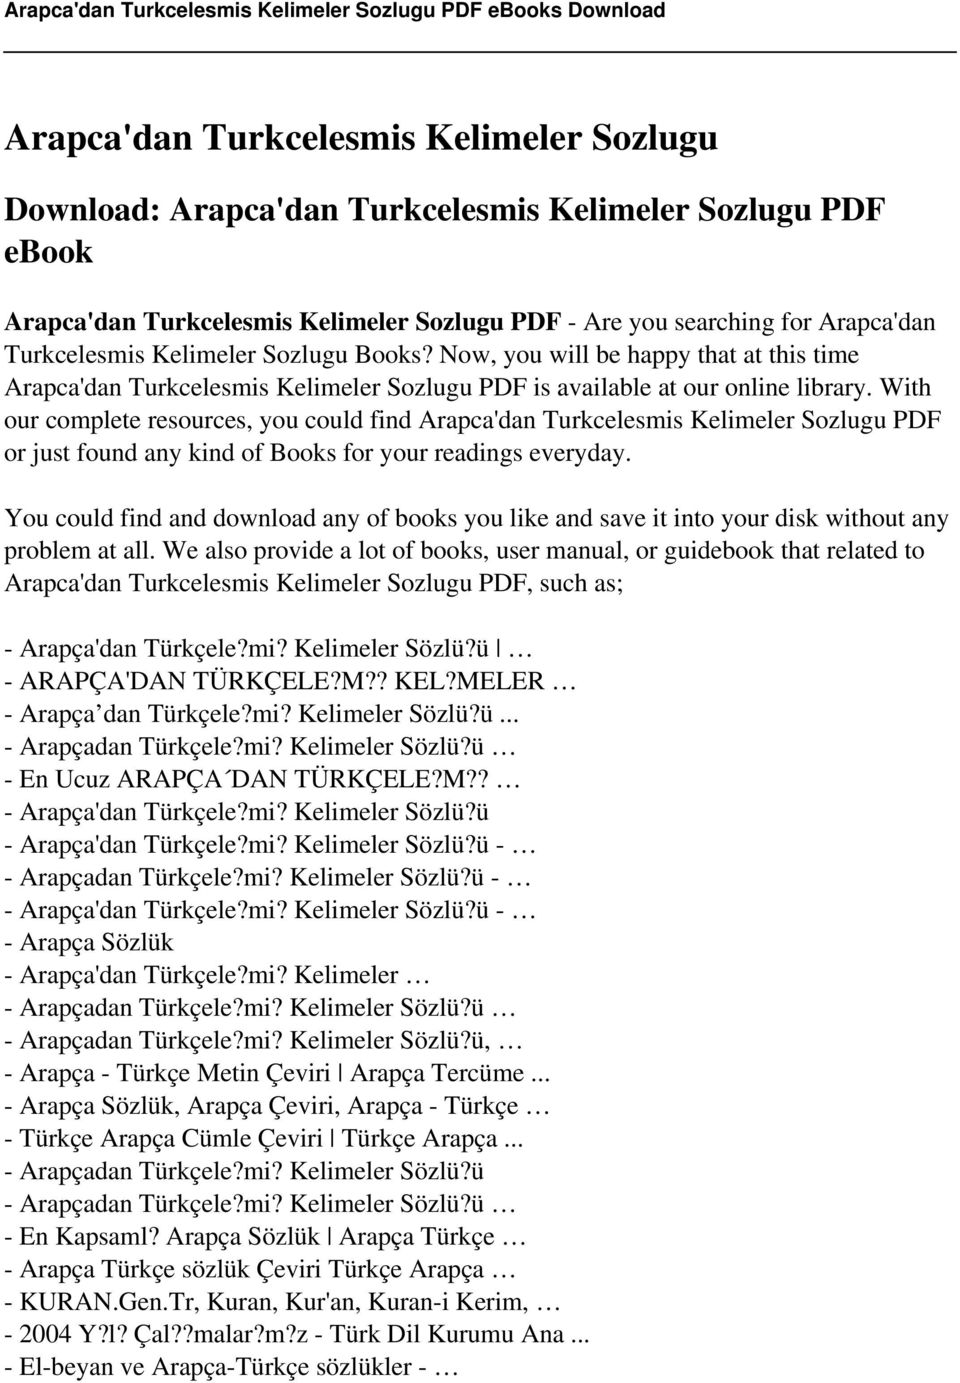 With our complete resources, you could find Arapca'dan Turkcelesmis Kelimeler Sozlugu PDF or just found any kind of Books for your readings everyday.